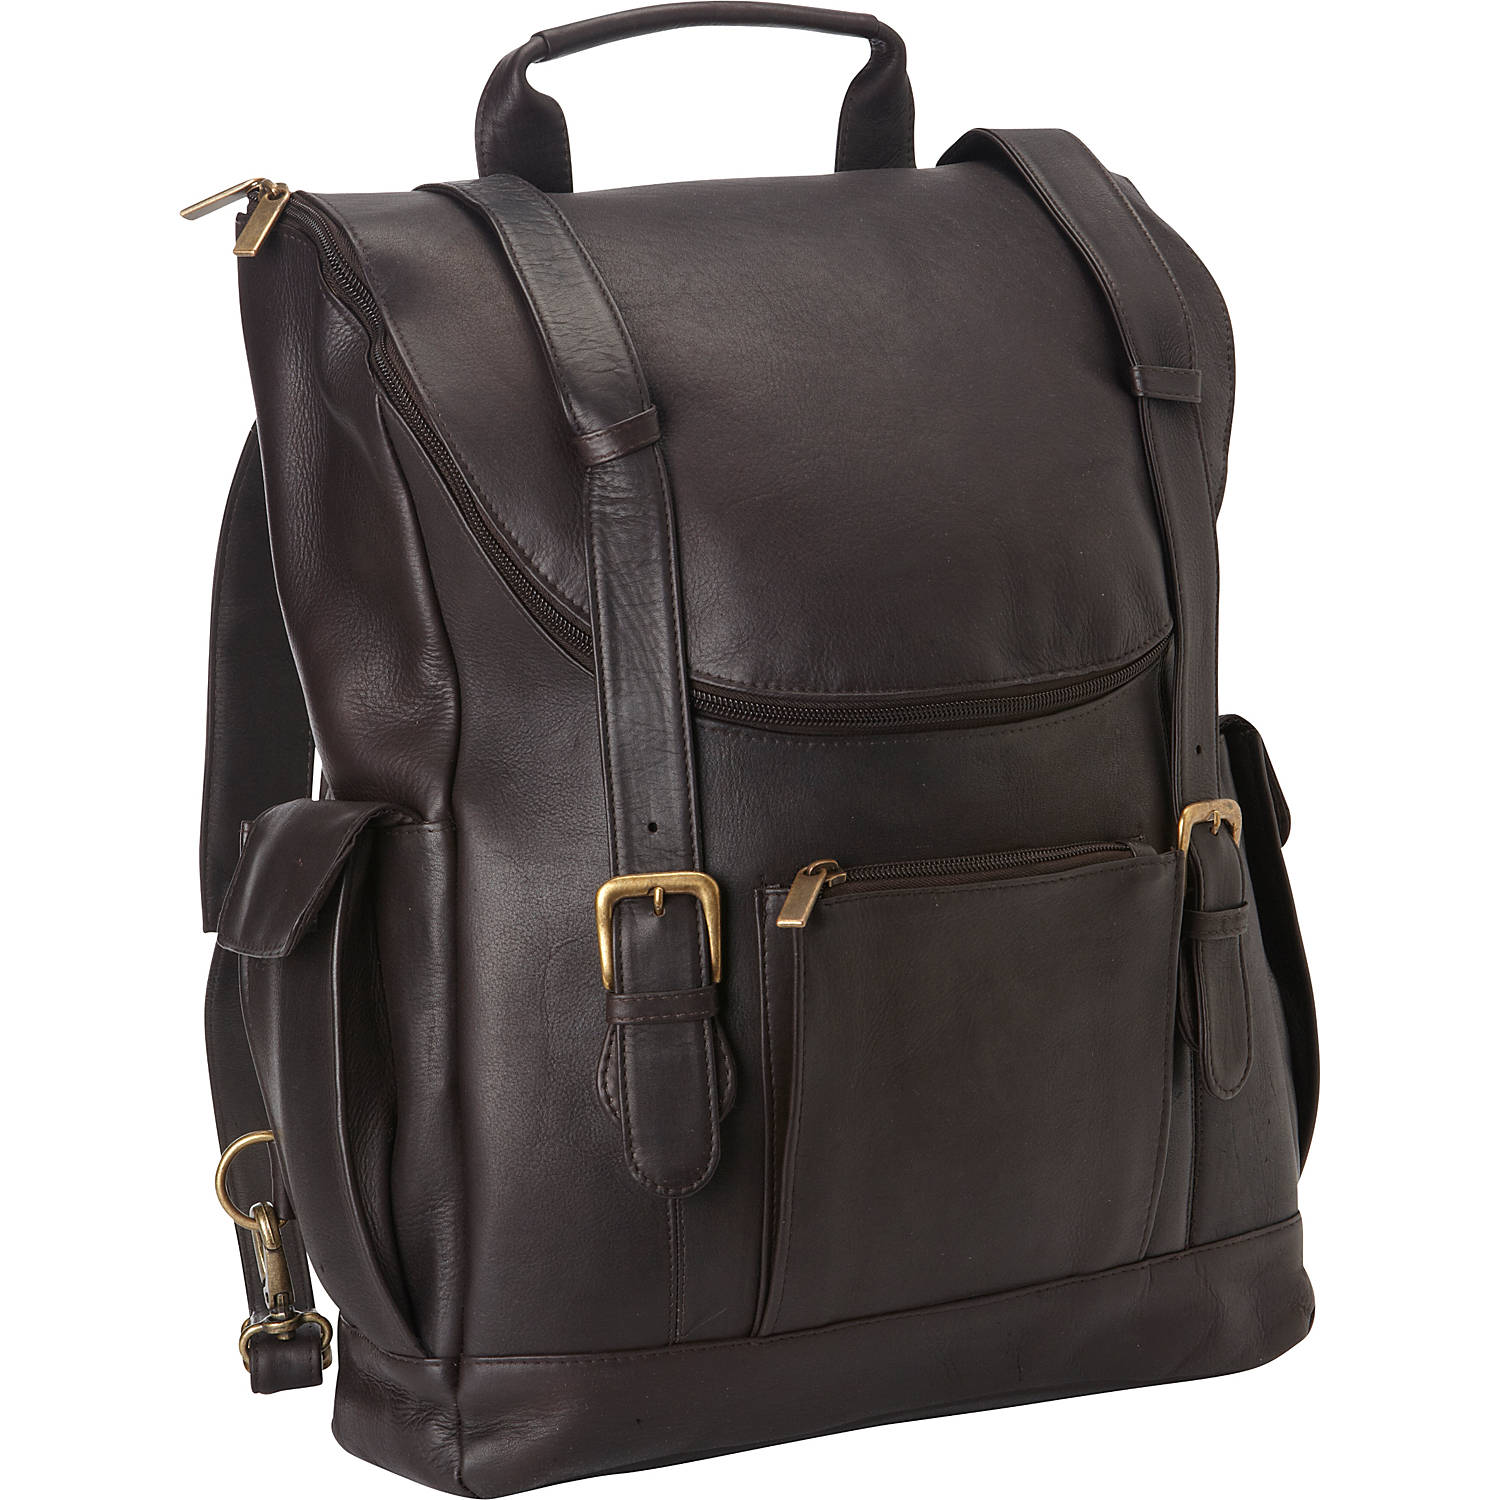 Tan Leather Backpack - Slim – The Real Leather Company